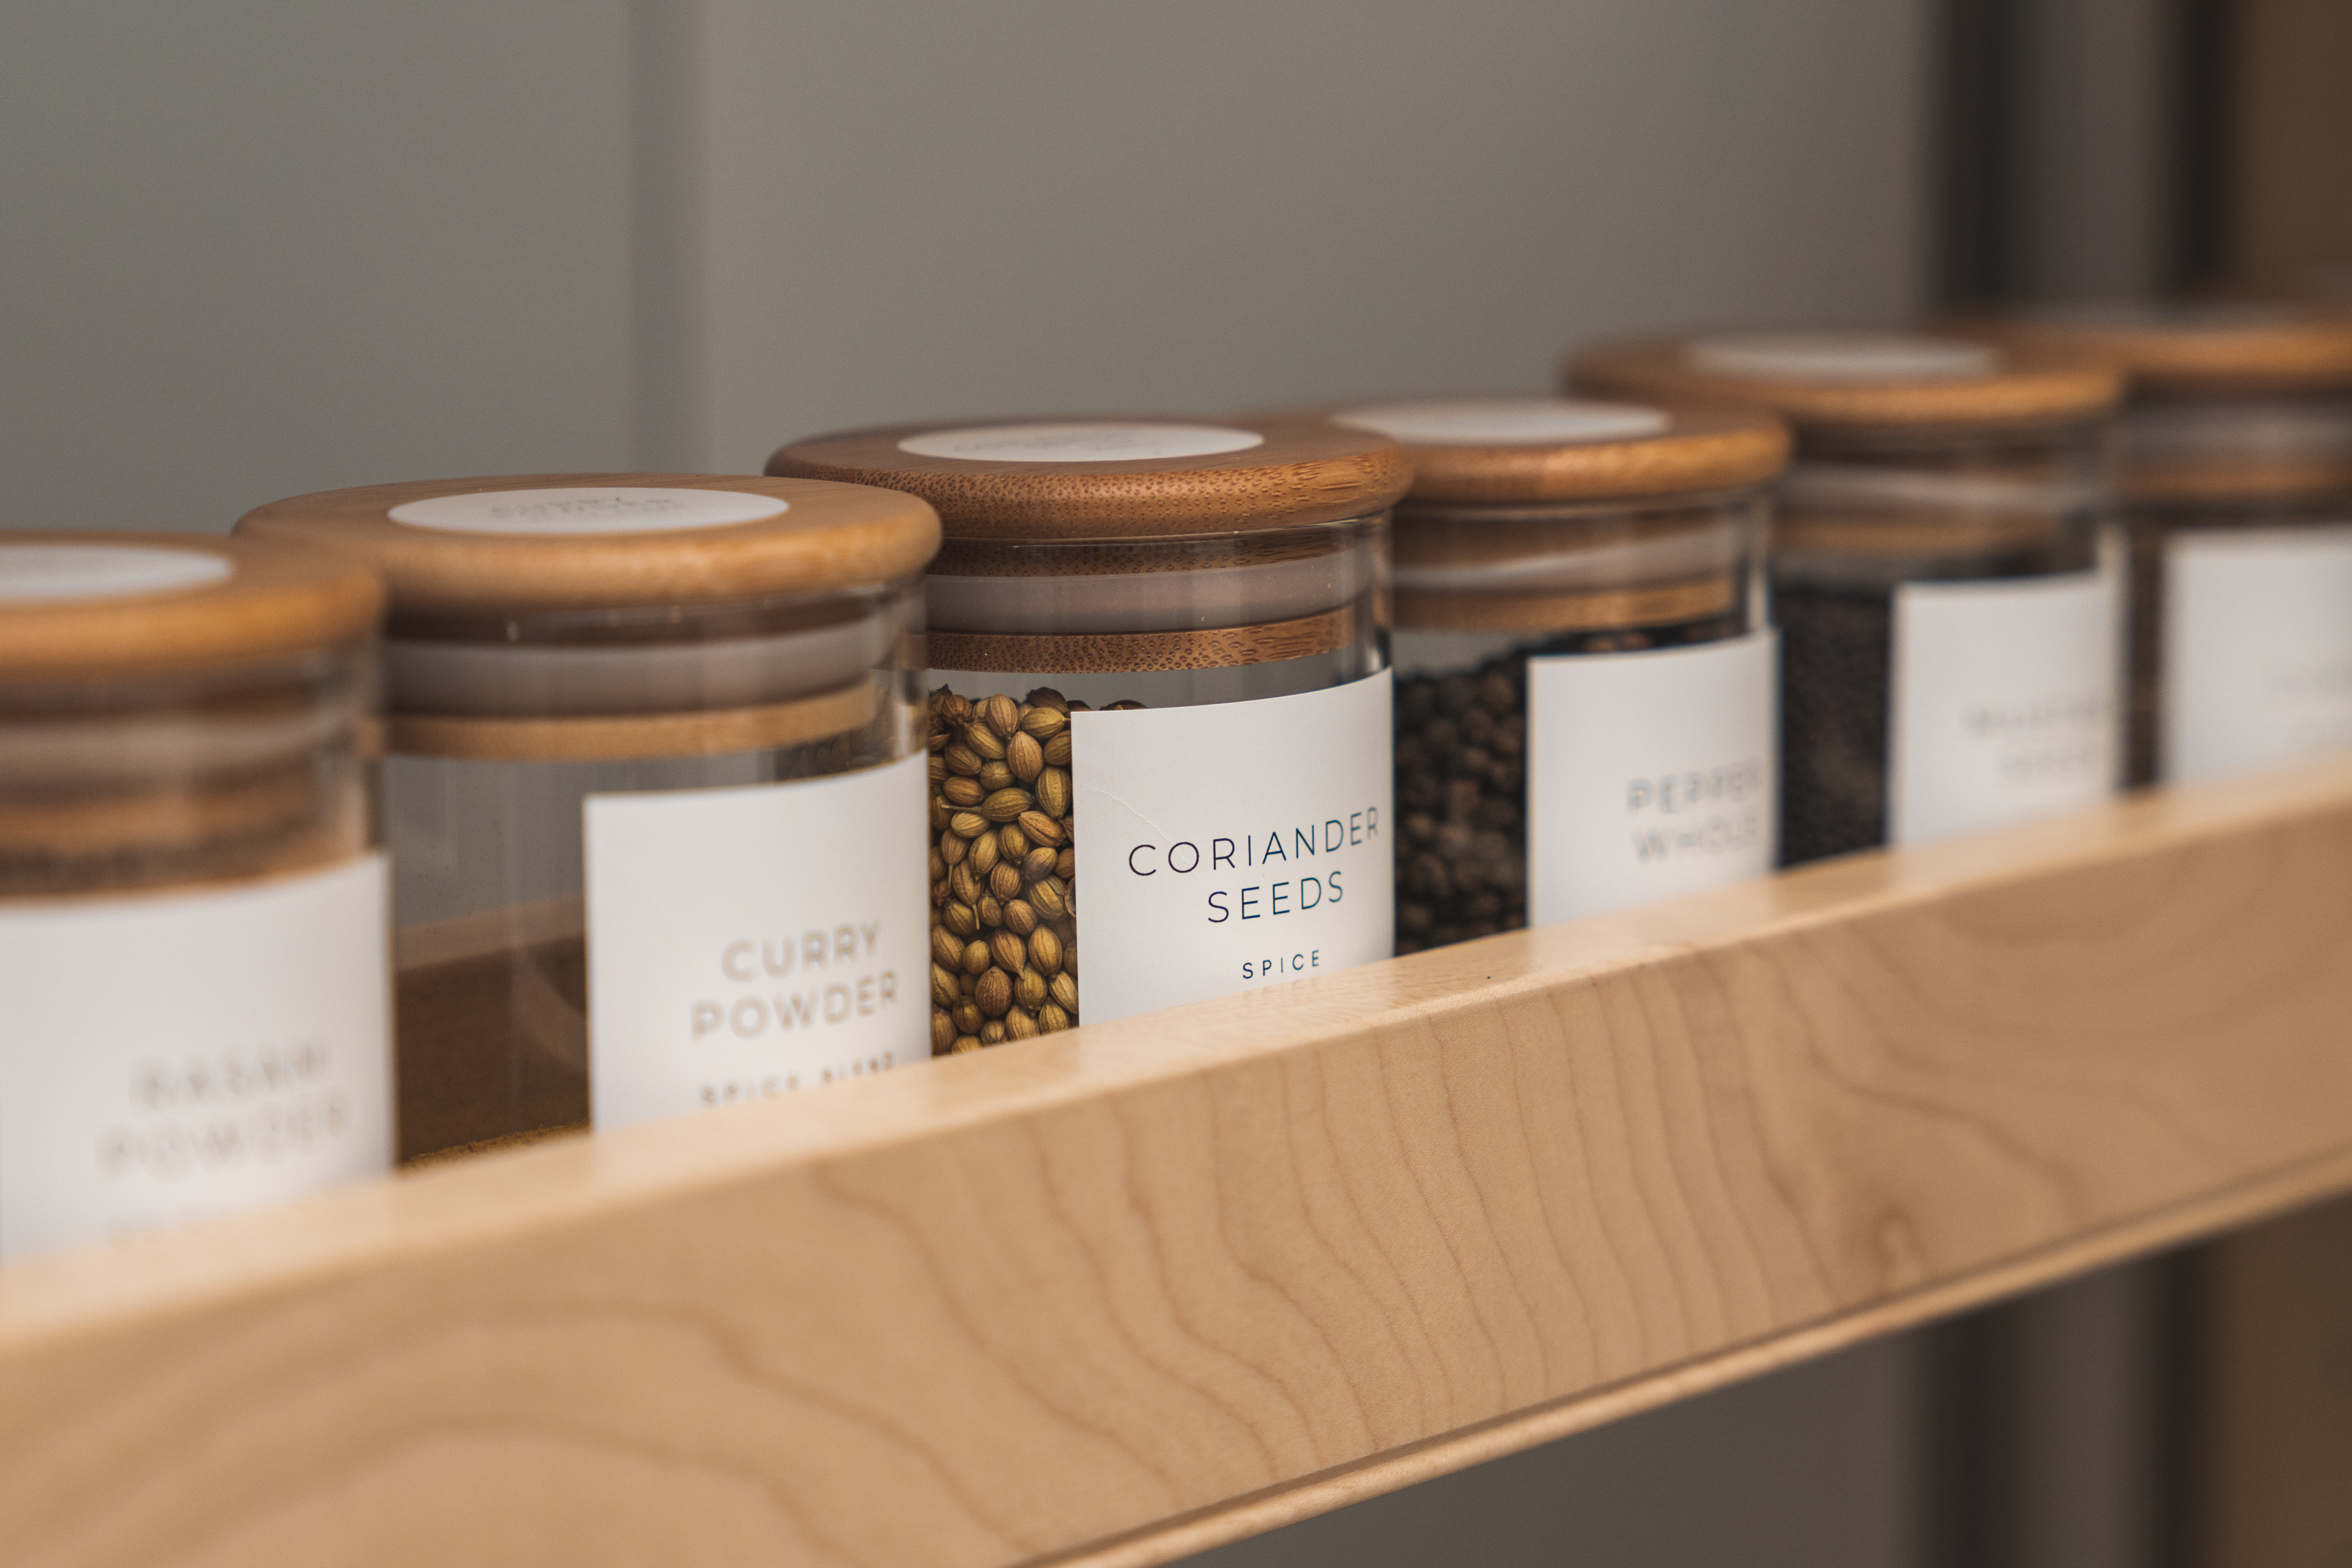 Clear spice containers with labels